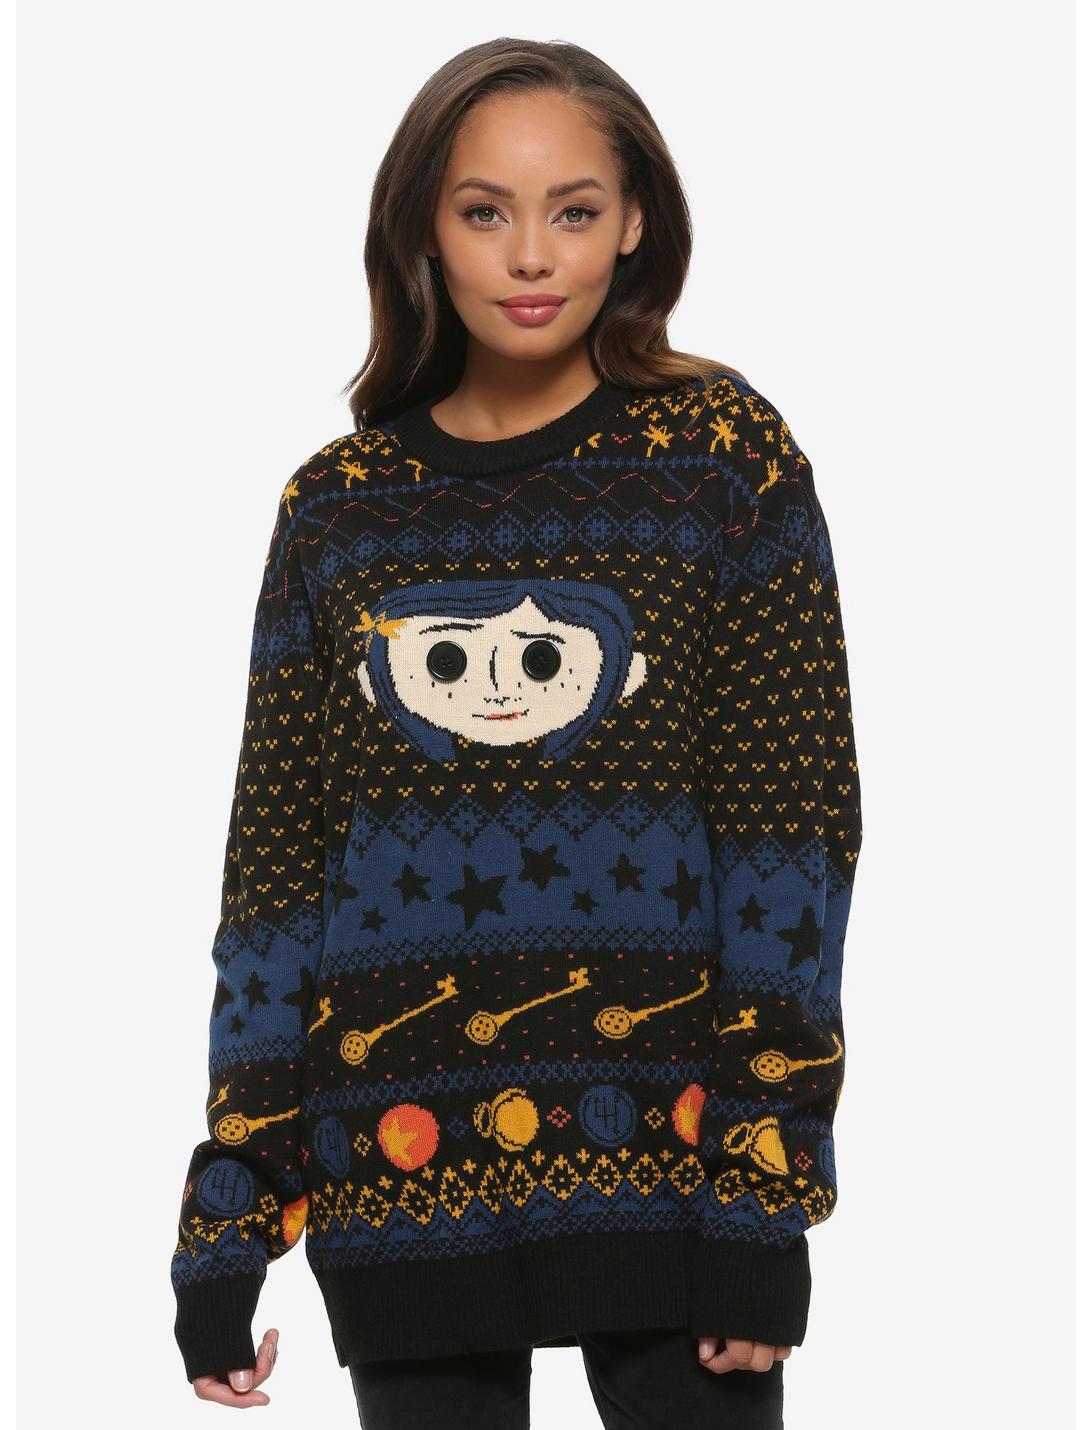 Coraline Button Eyes Ugly Holiday Sweater - BoxLunch Exclusive, MULTI, hi-res